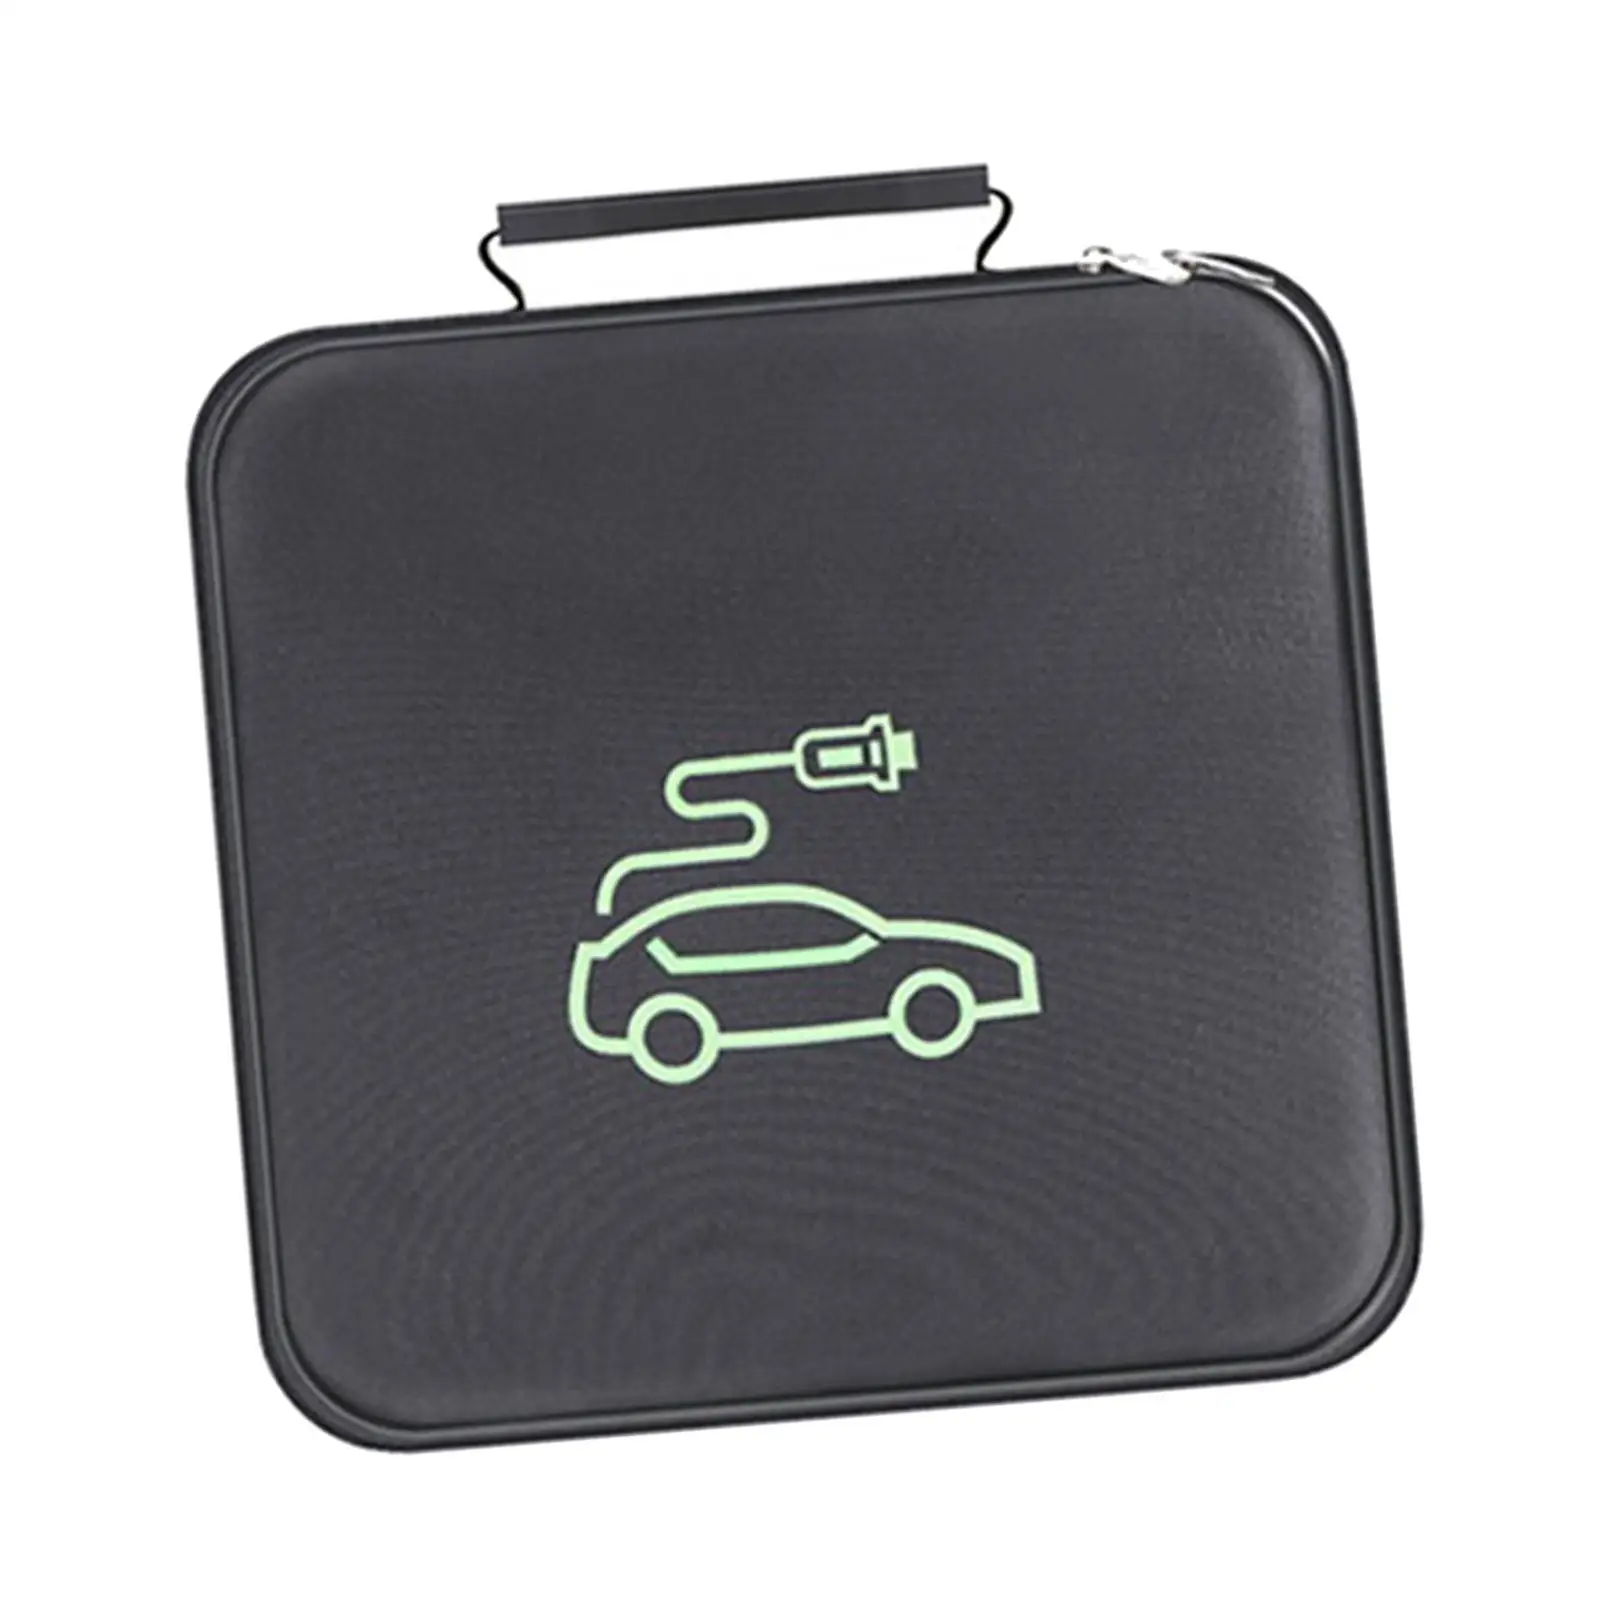 Waterproof EV Cables Bag EV Charging Cable Storage Bag EV Cable Organizer Bag Cable Bag for Cable Power Cords Hoses